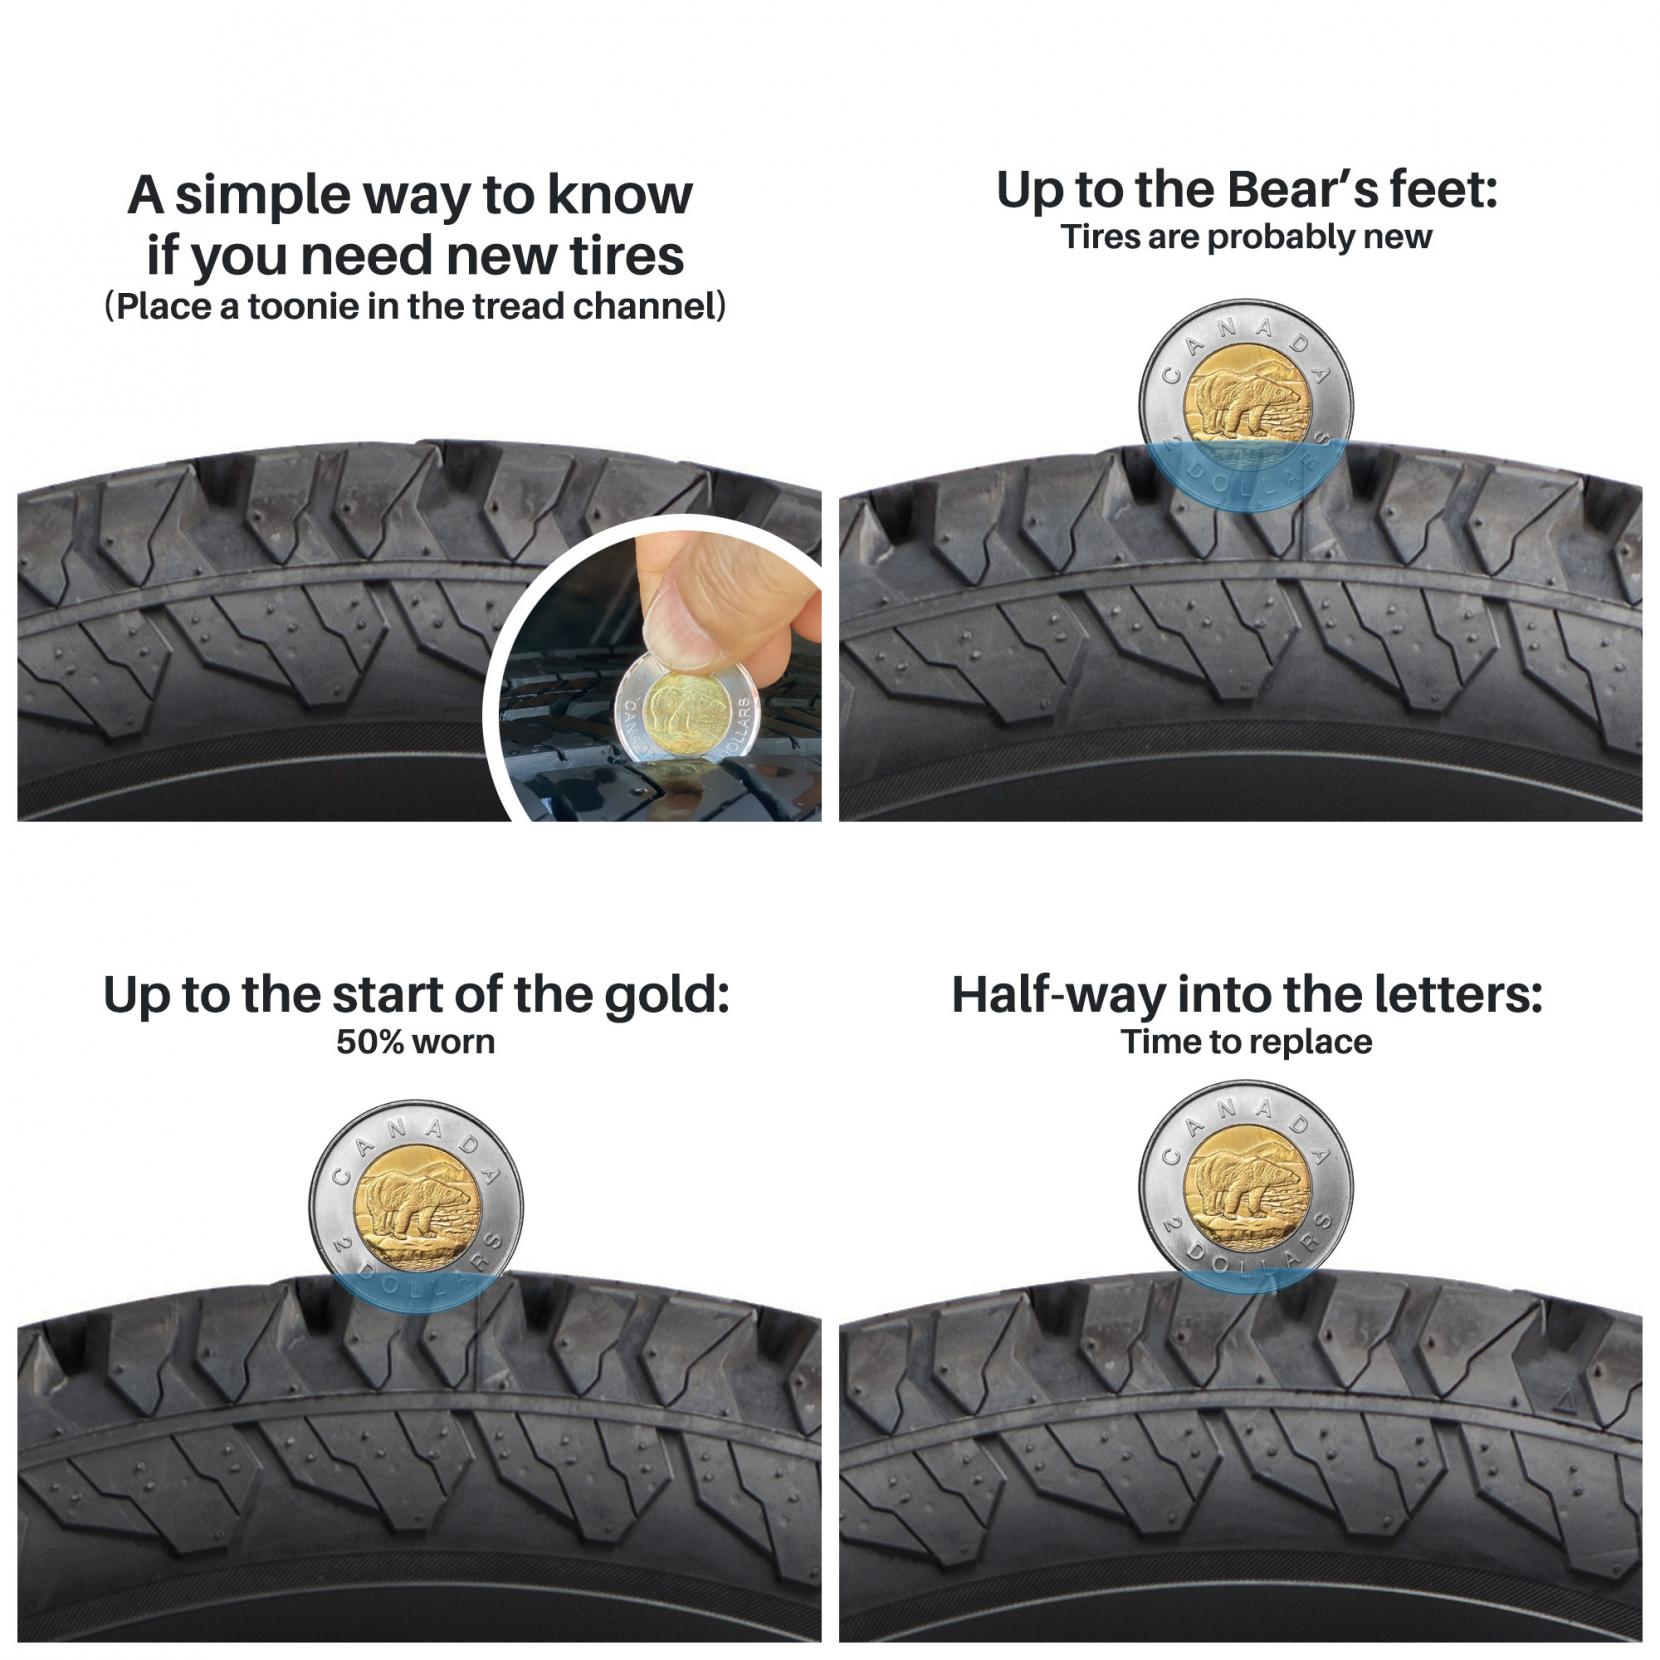 Check tire tread with a coin